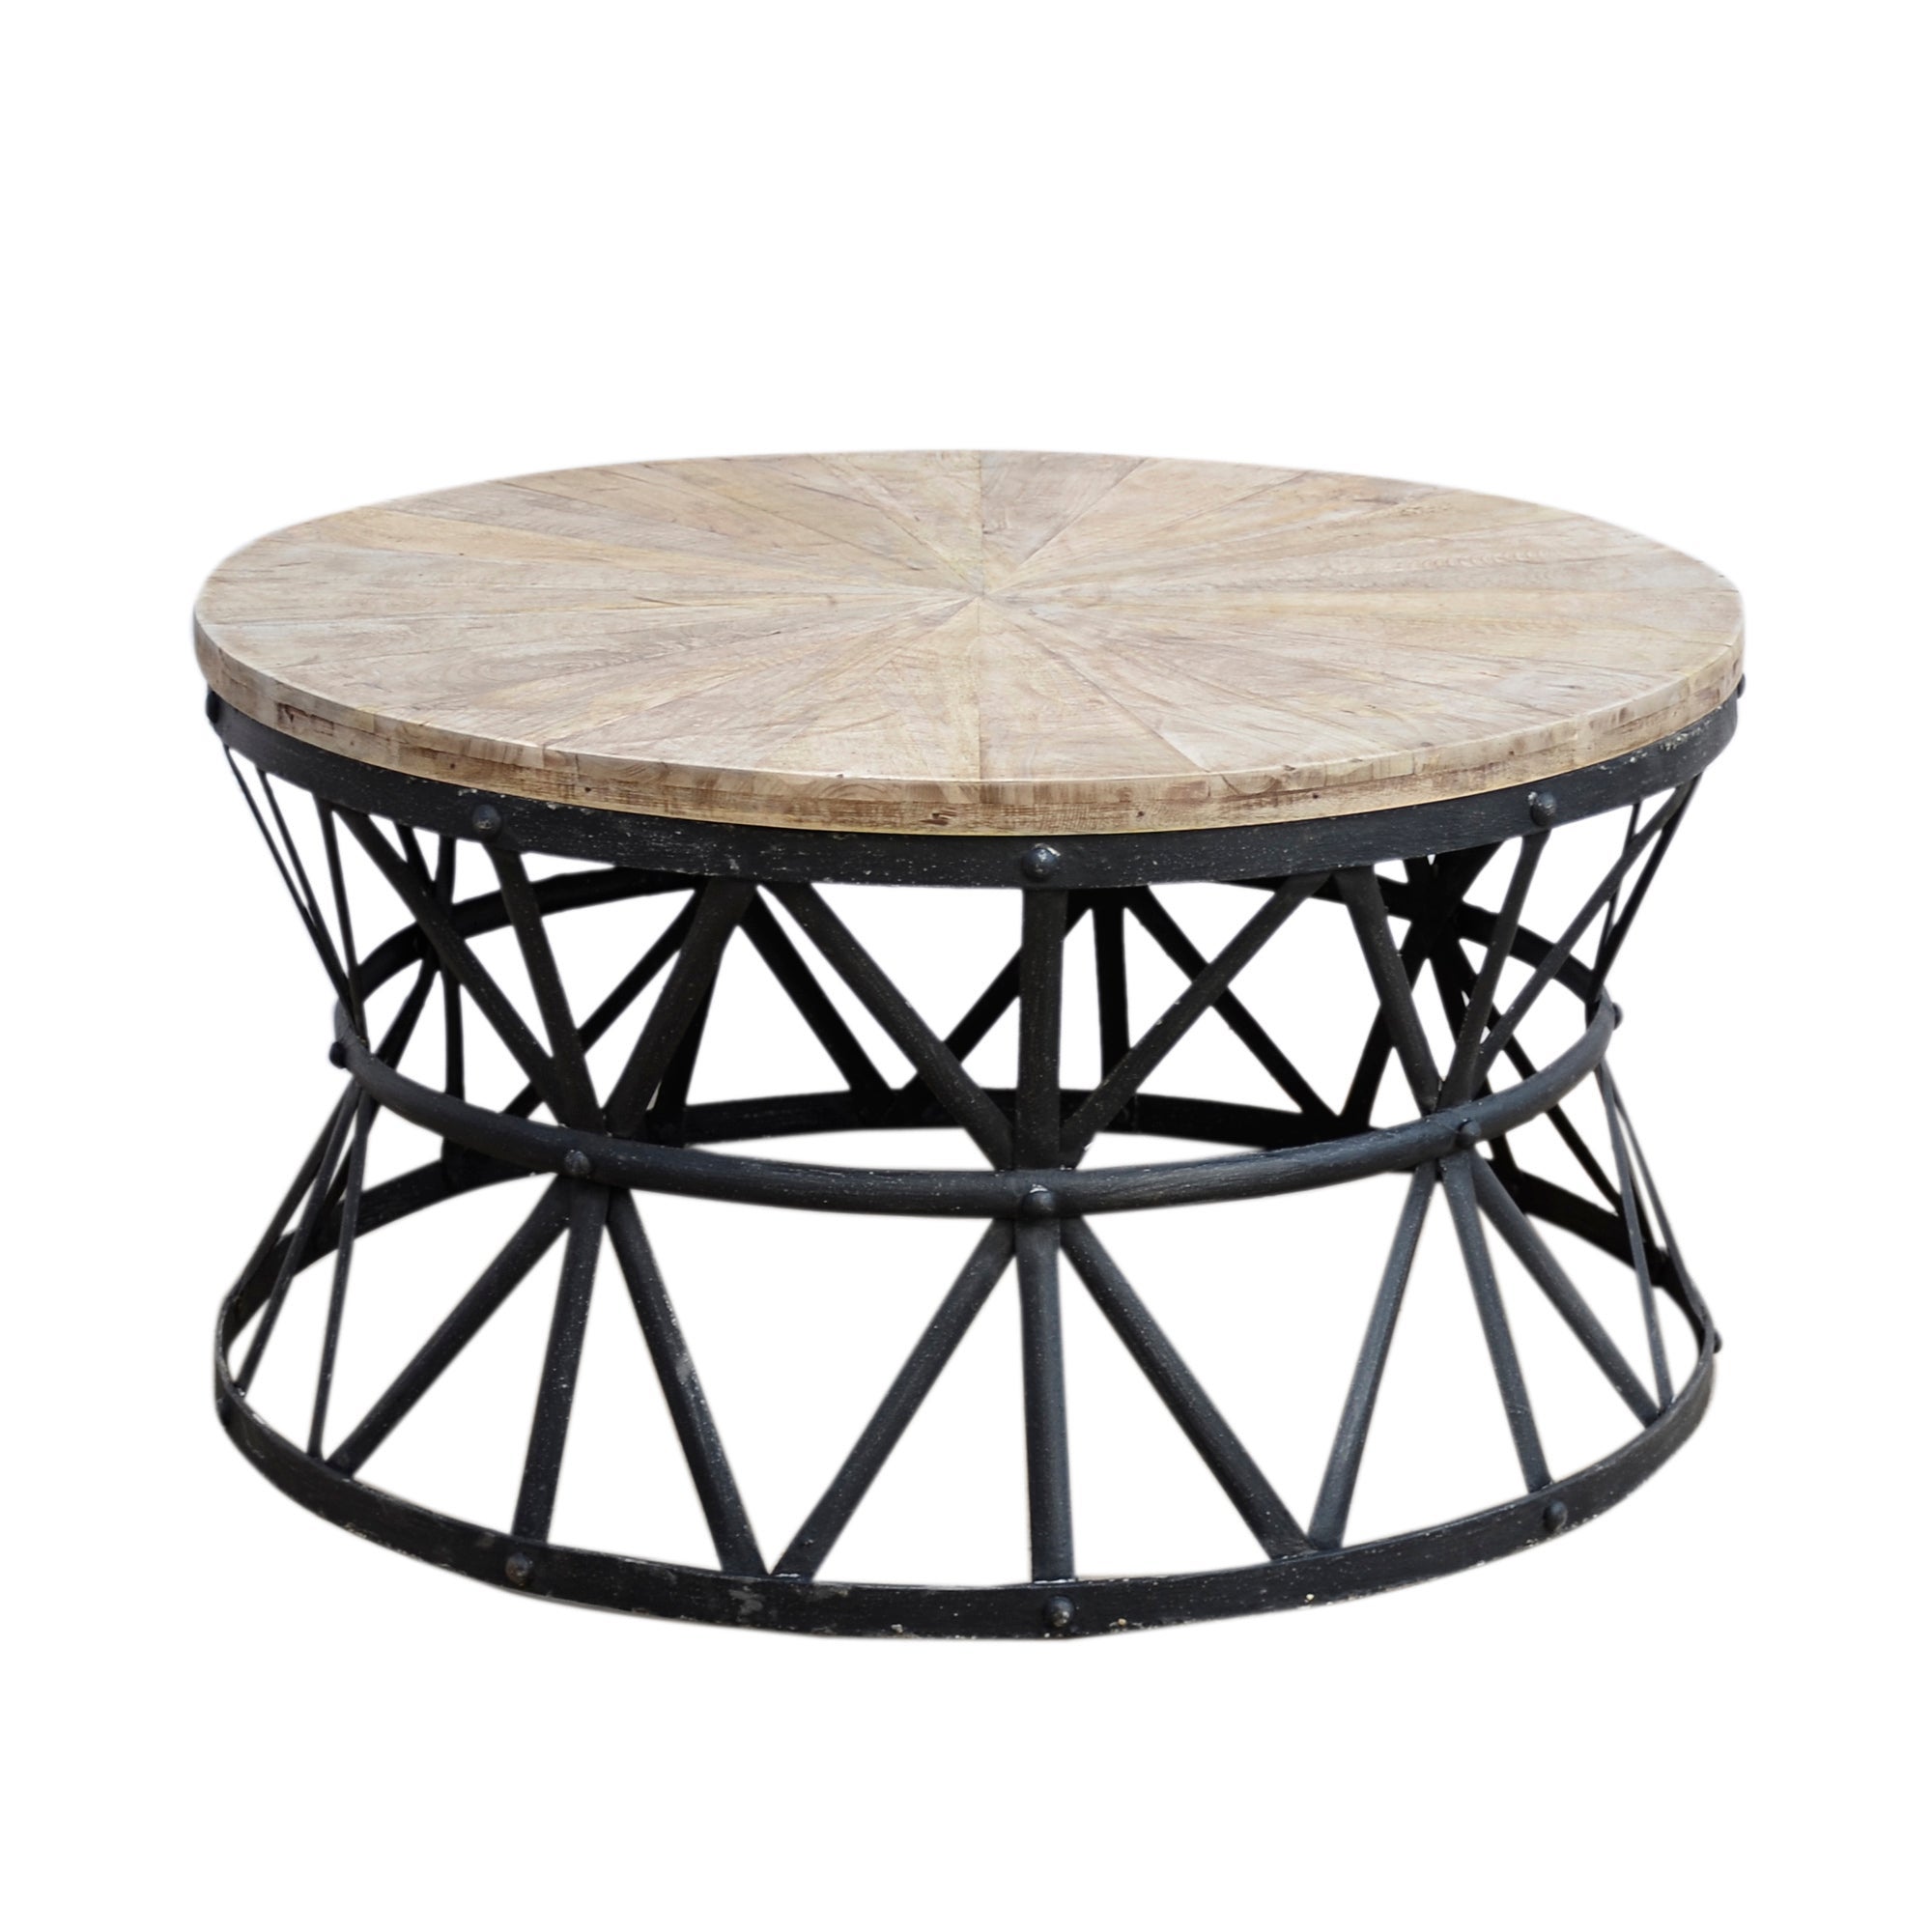 Buy Round Coffee Tables For Sale Online